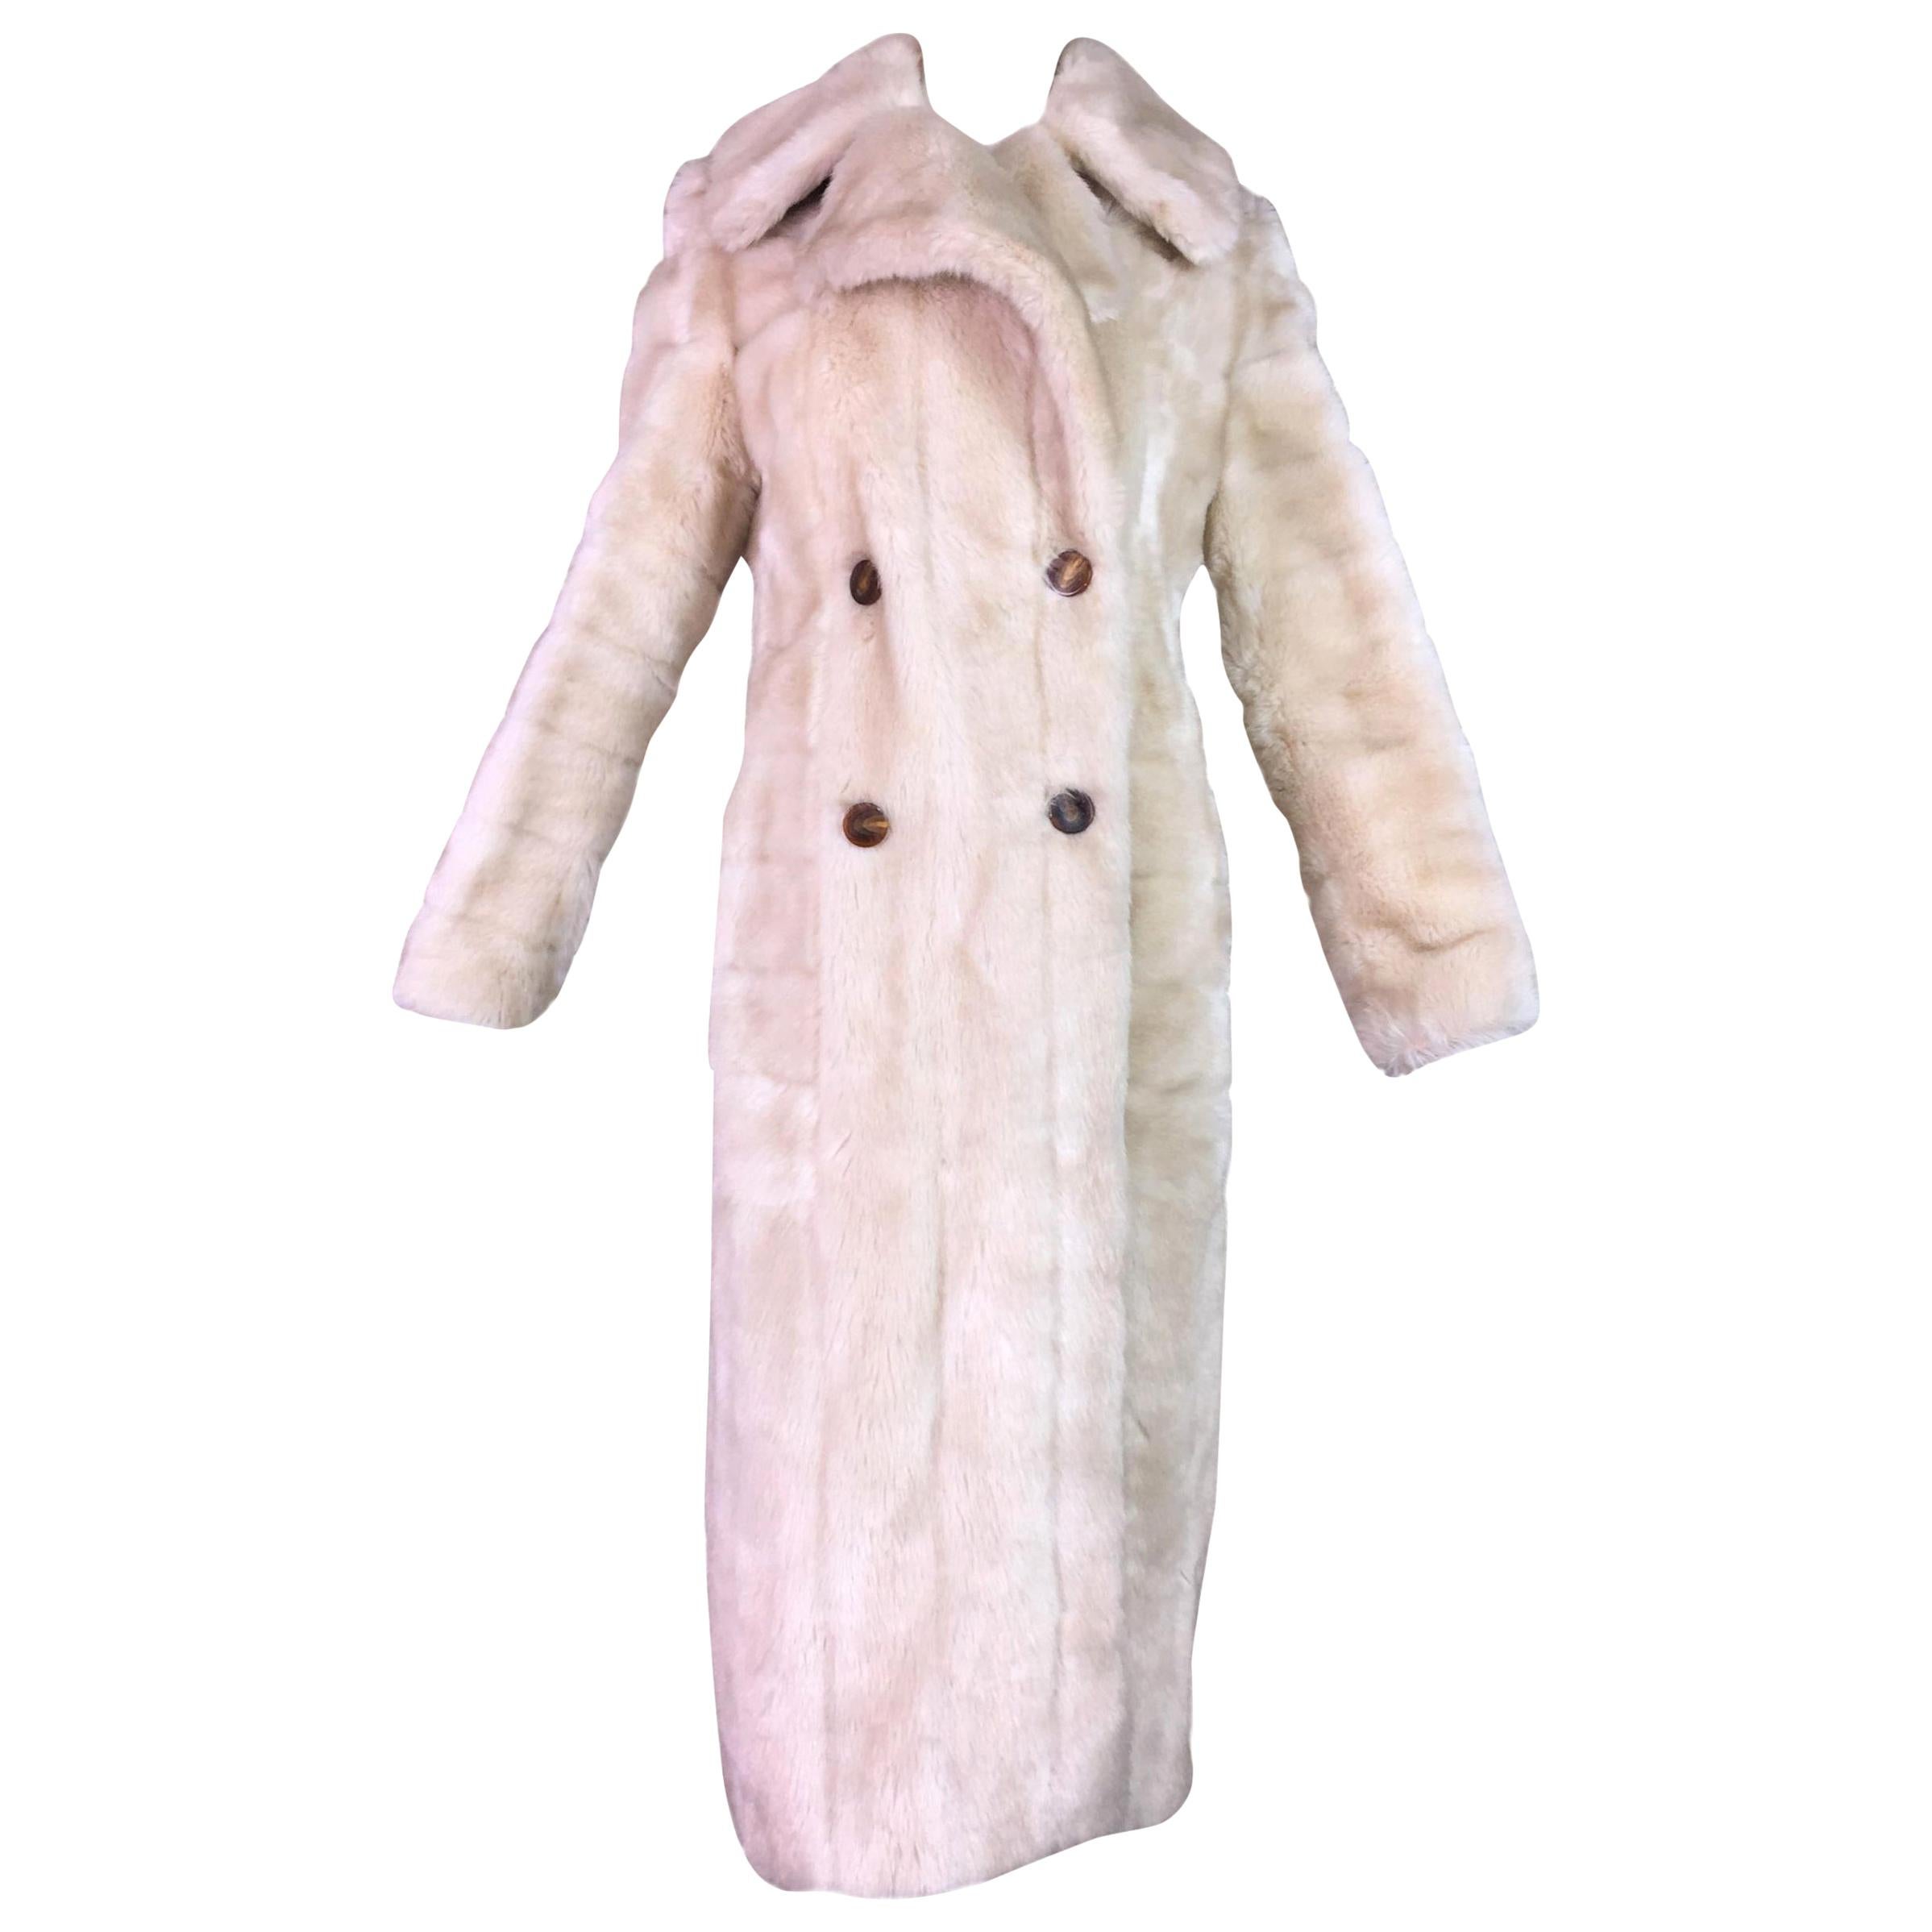 F/W 1996 Gucci by Tom Ford Blonde Faux Fur Full Length Coat Jacket